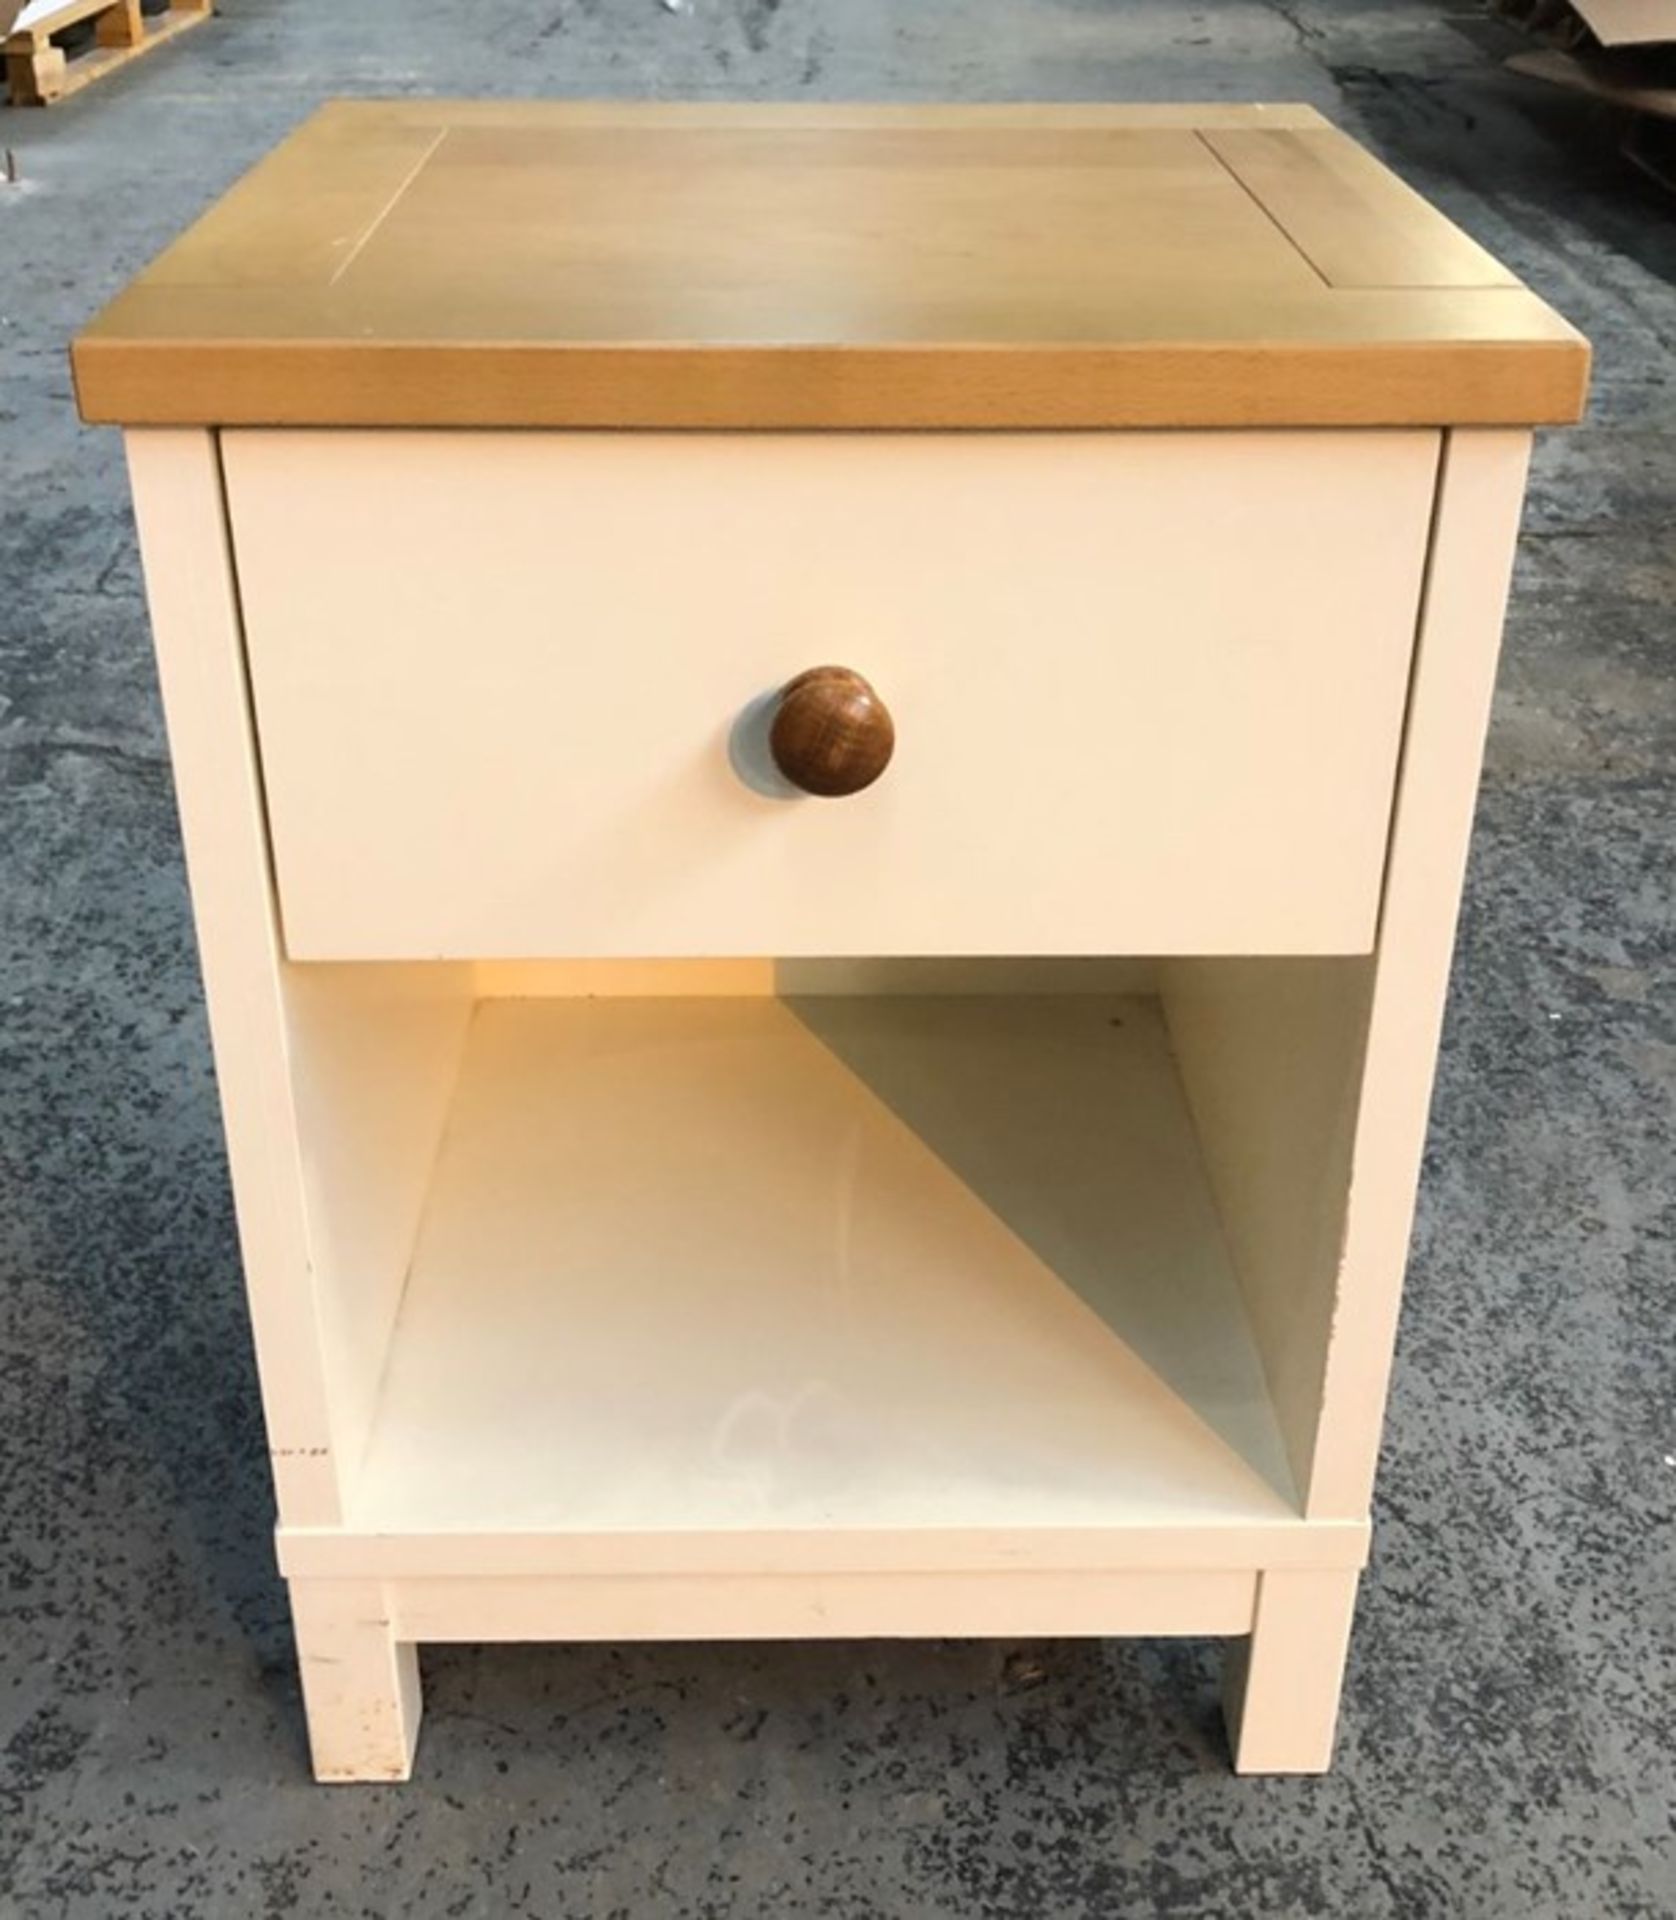 1 X BEDSIDE TABLE - WHITE